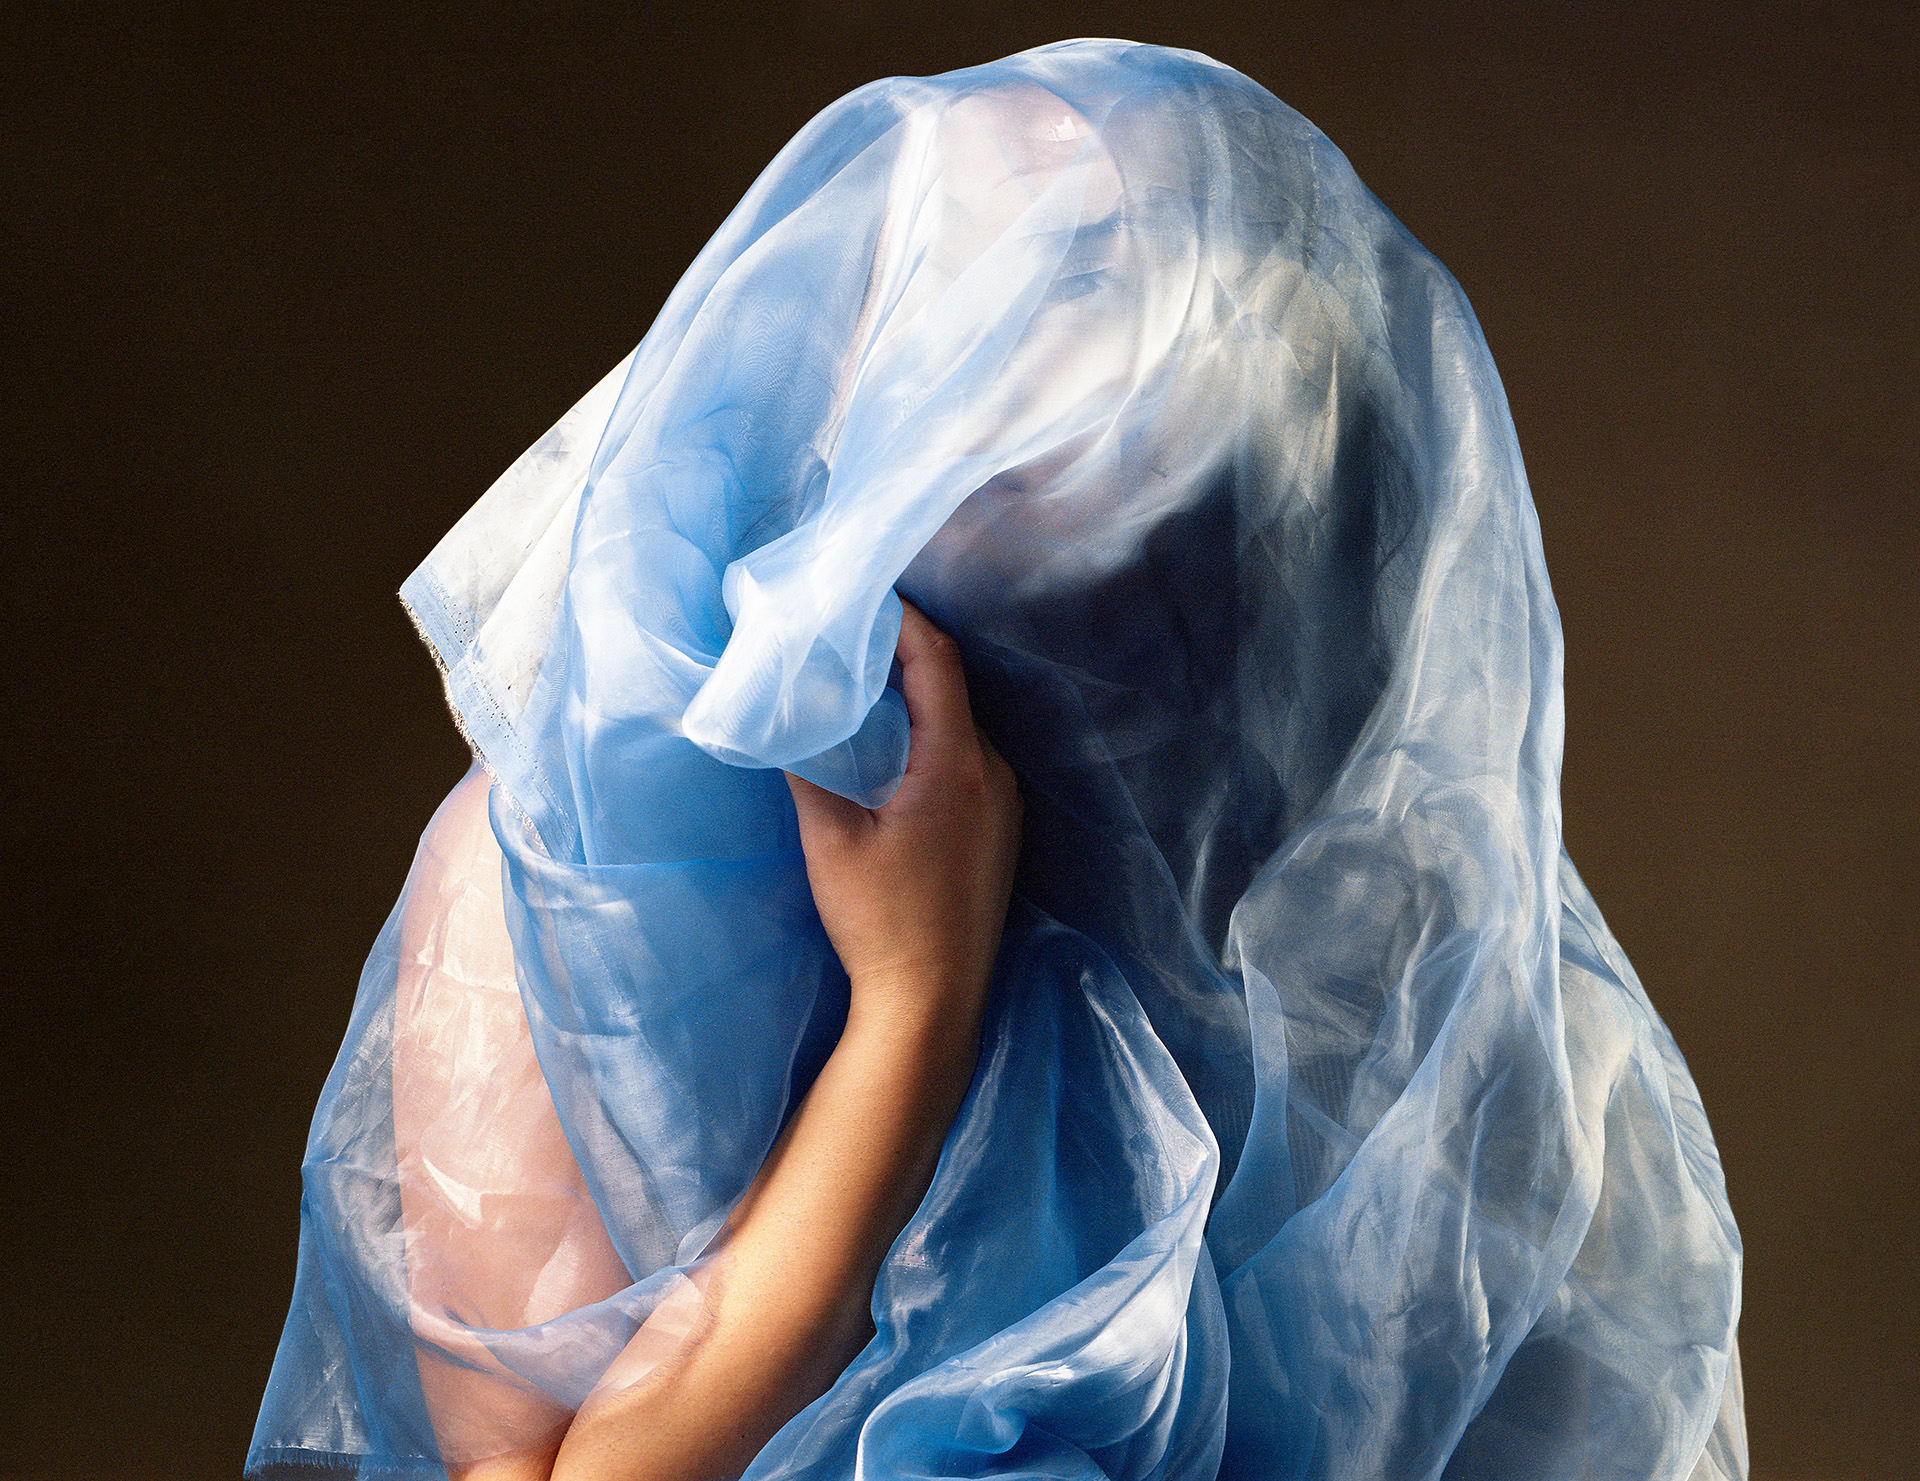 A photograph of someone wrapped in a blue sheer fabric, their hand grasps the fabric and their face is partially visible behind the fabric